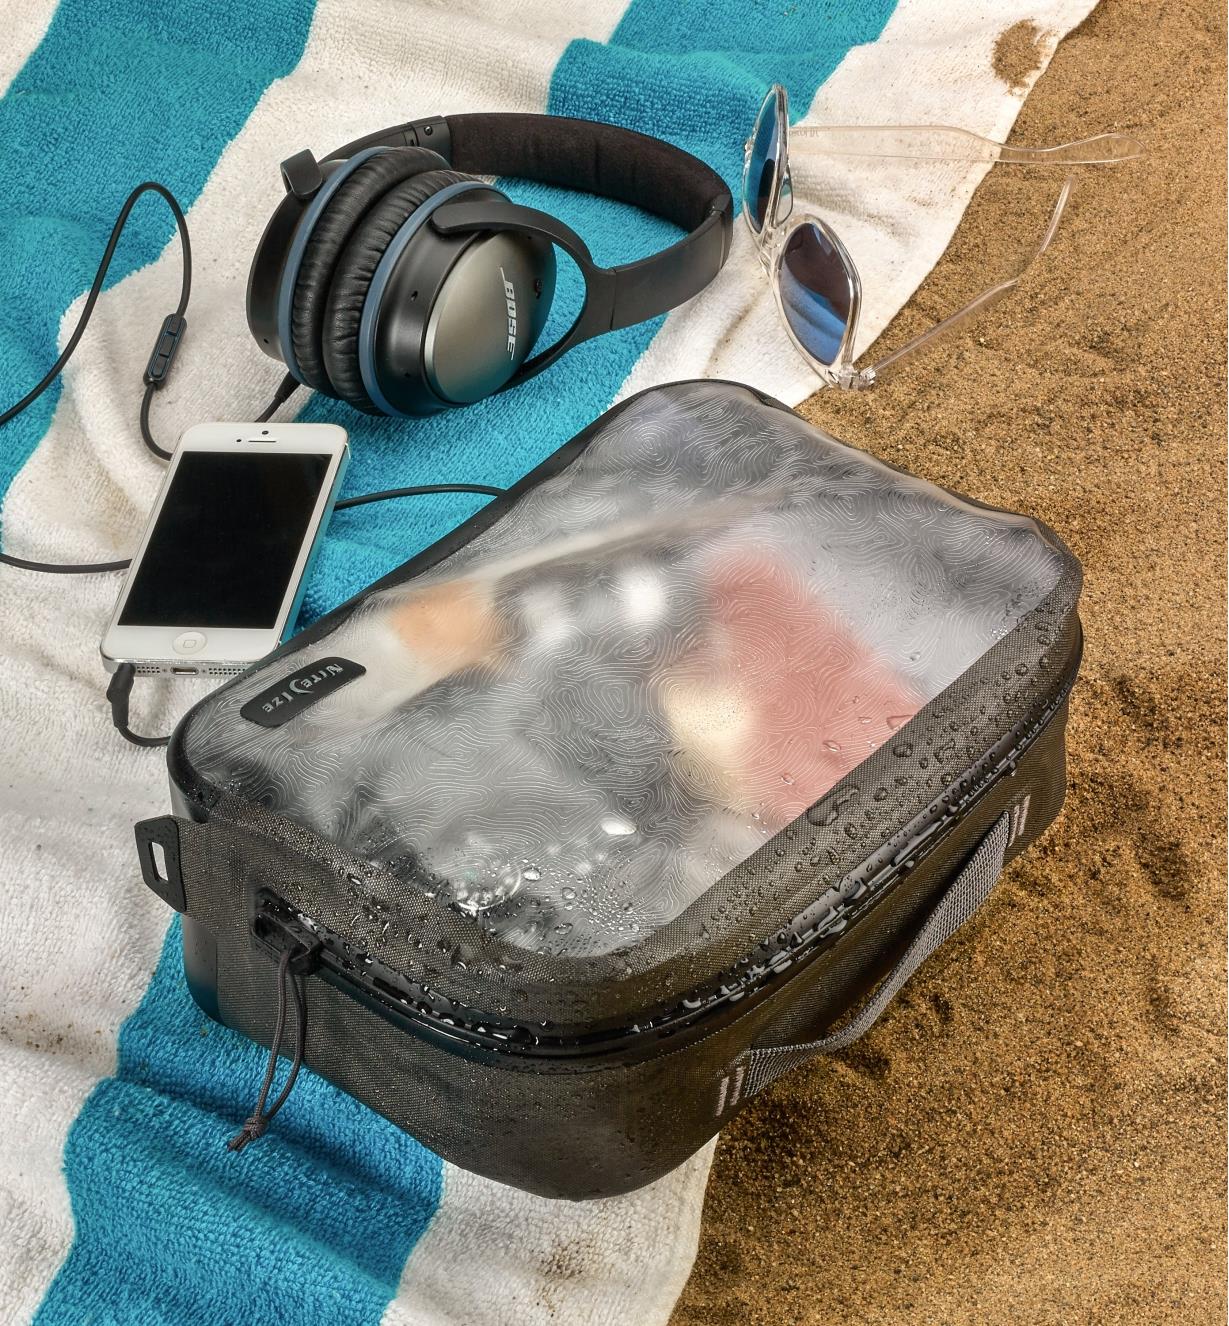 A closed RunOff medium packing cube filled with items lies on a beach towel with a cell phone, headphones and sunglasses nearby